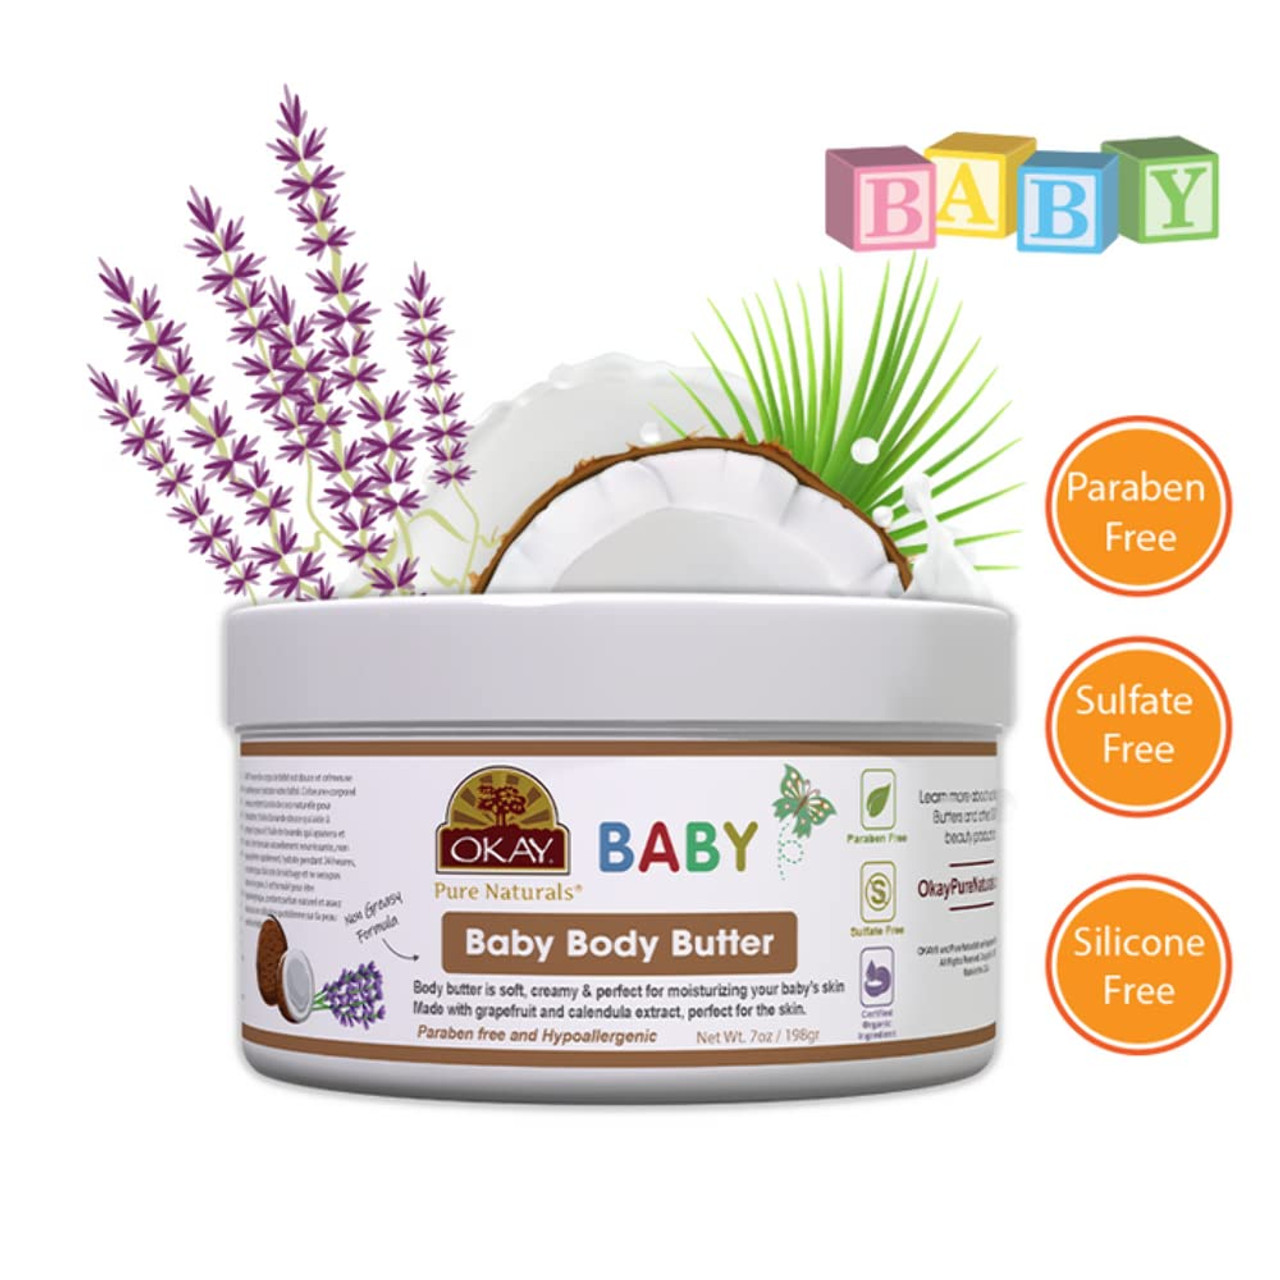 OKAY Baby Body Butter For All Skin Types Gently Moisturize and